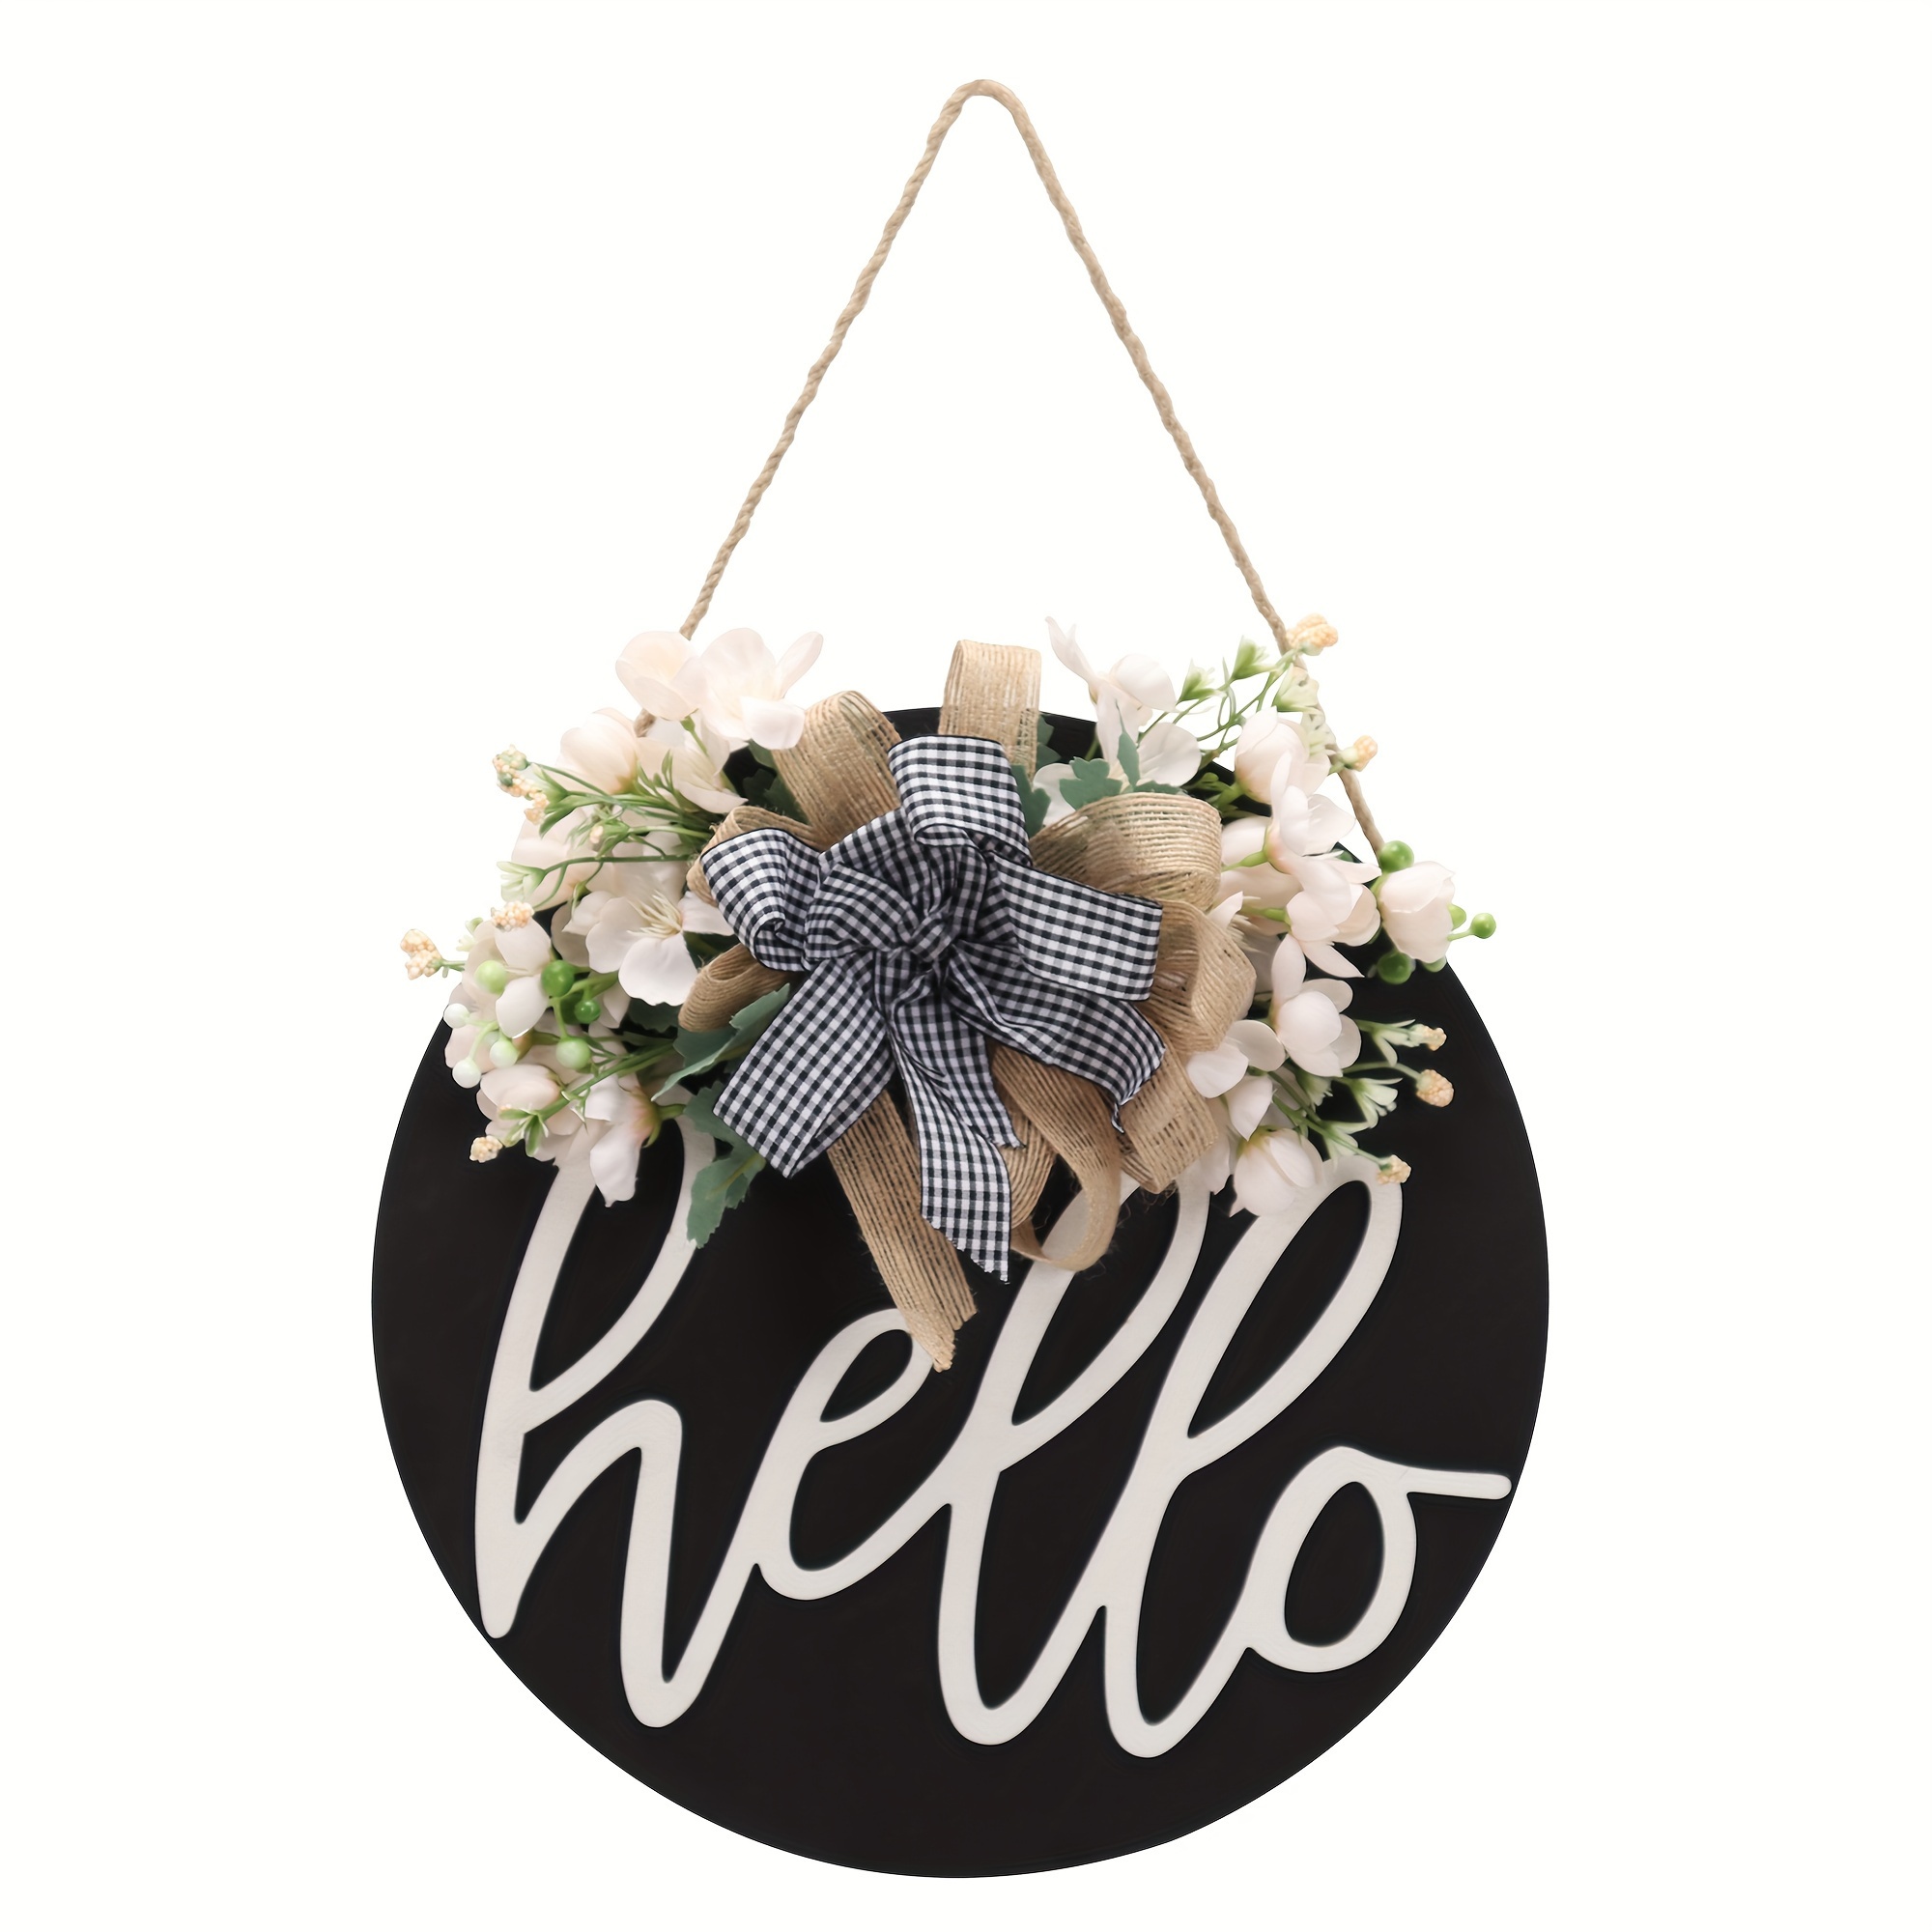 

Hello Round Wood Sign For Front Door - Manufactured Wood And Plastic Wall Hanging Welcome Sign For Farmhouse Porch - No Electricity Or Feathers Required